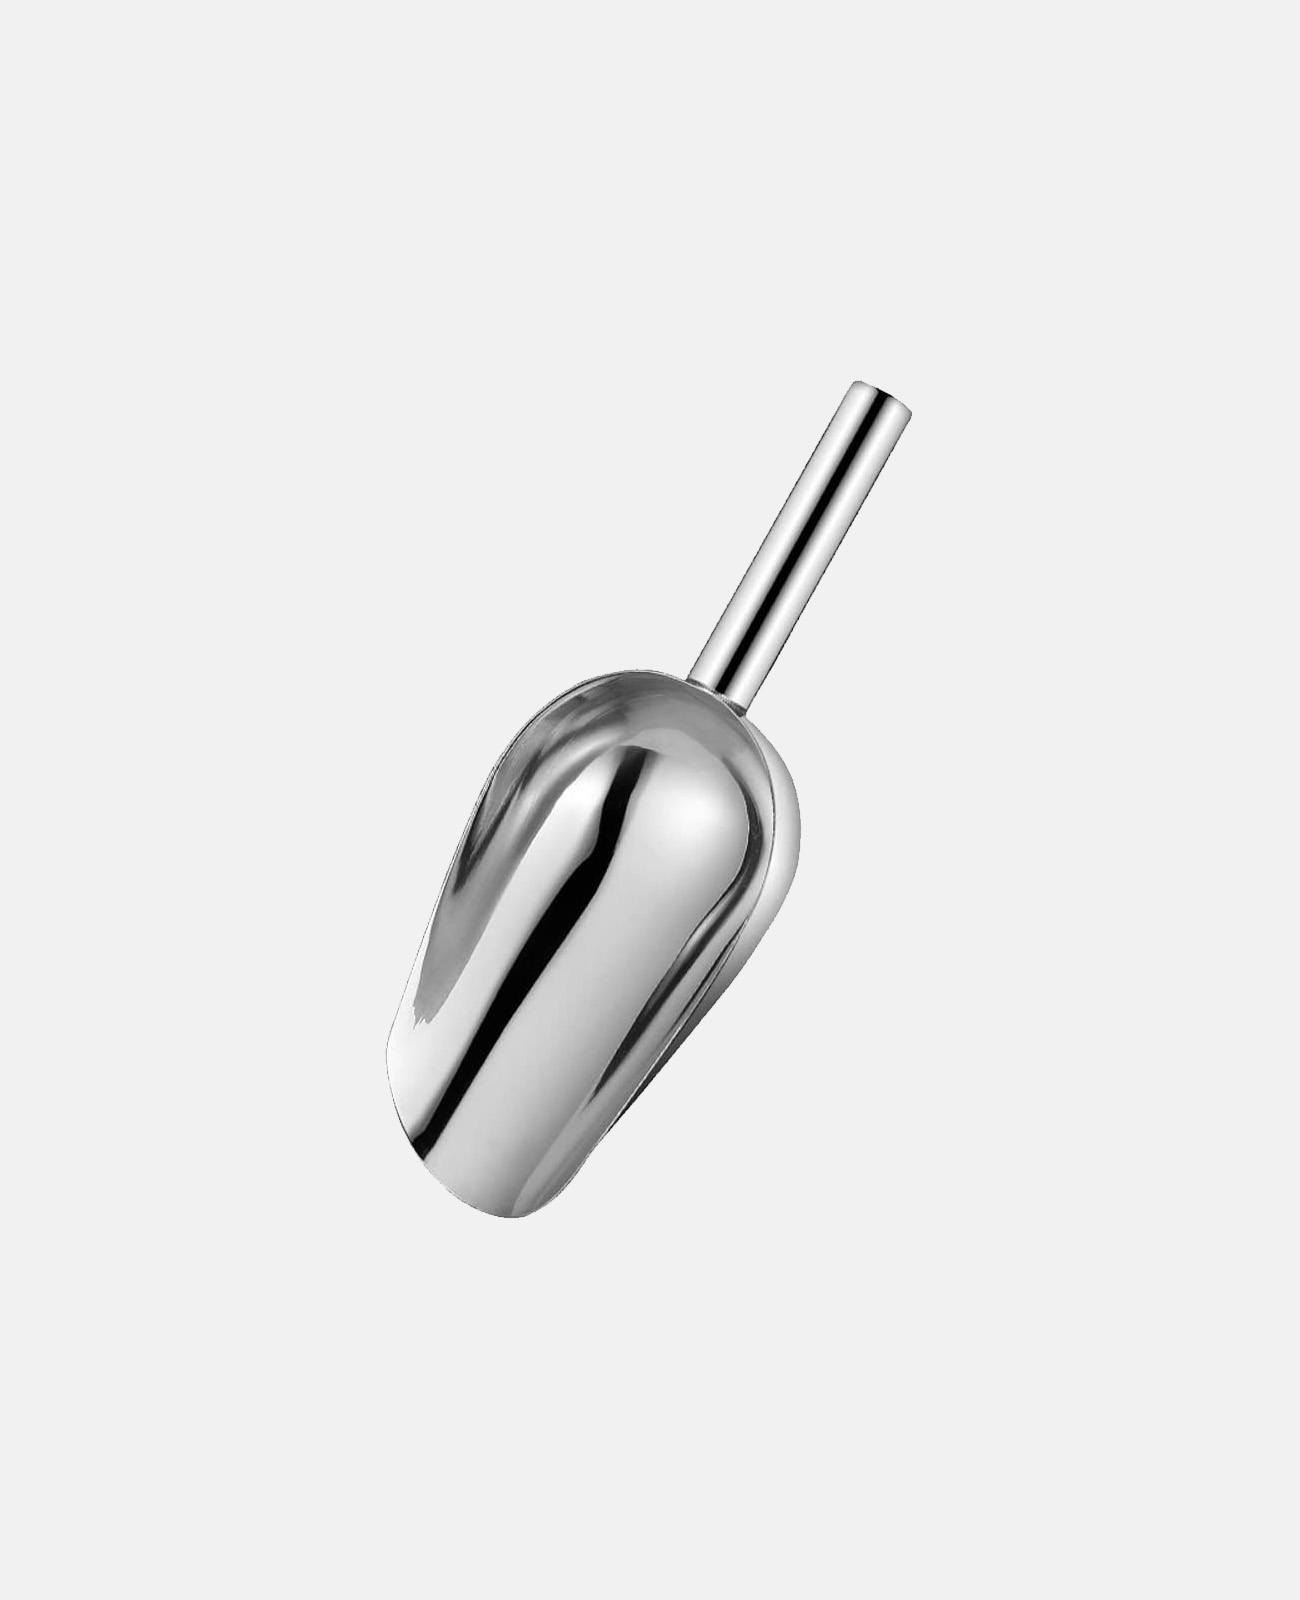 Stainless Steel Coffee Bean Scoop - Size 100